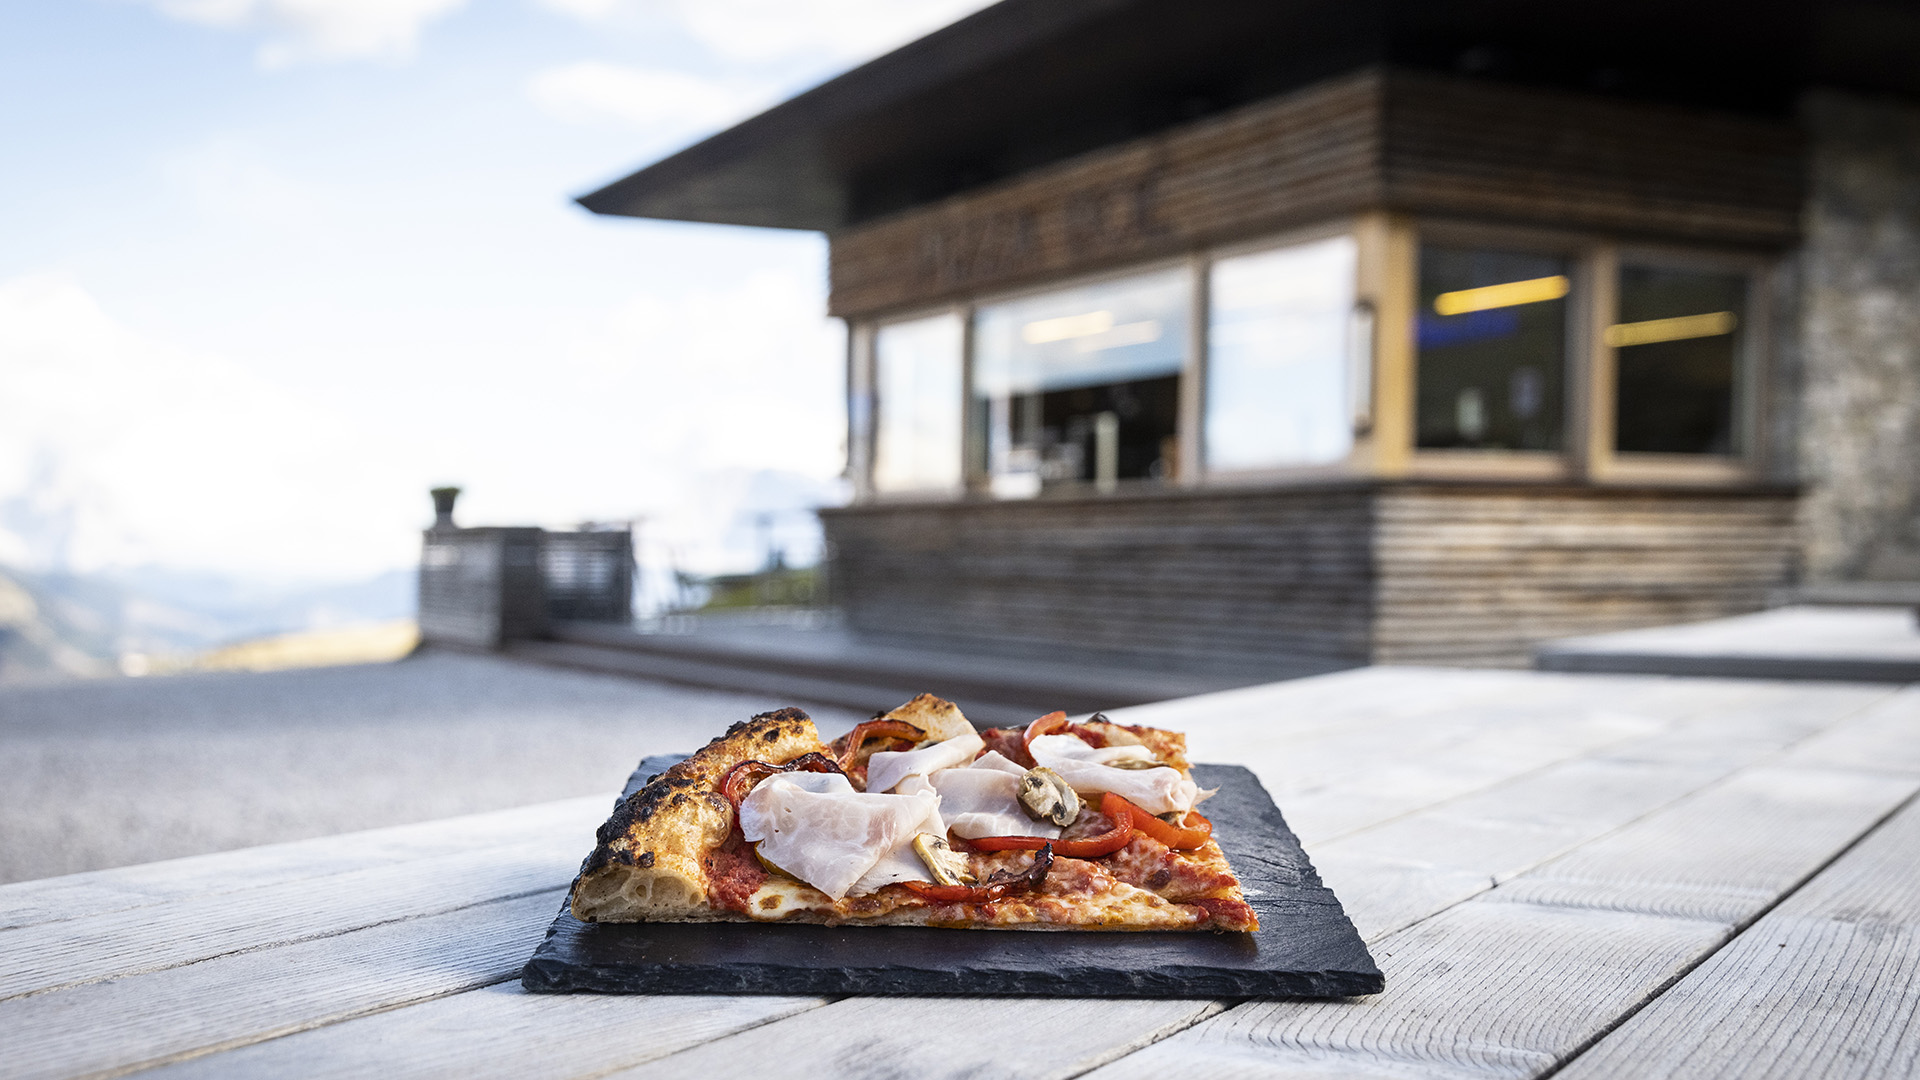 A tasty serving of three pizzas ready to be served in the self-service area.